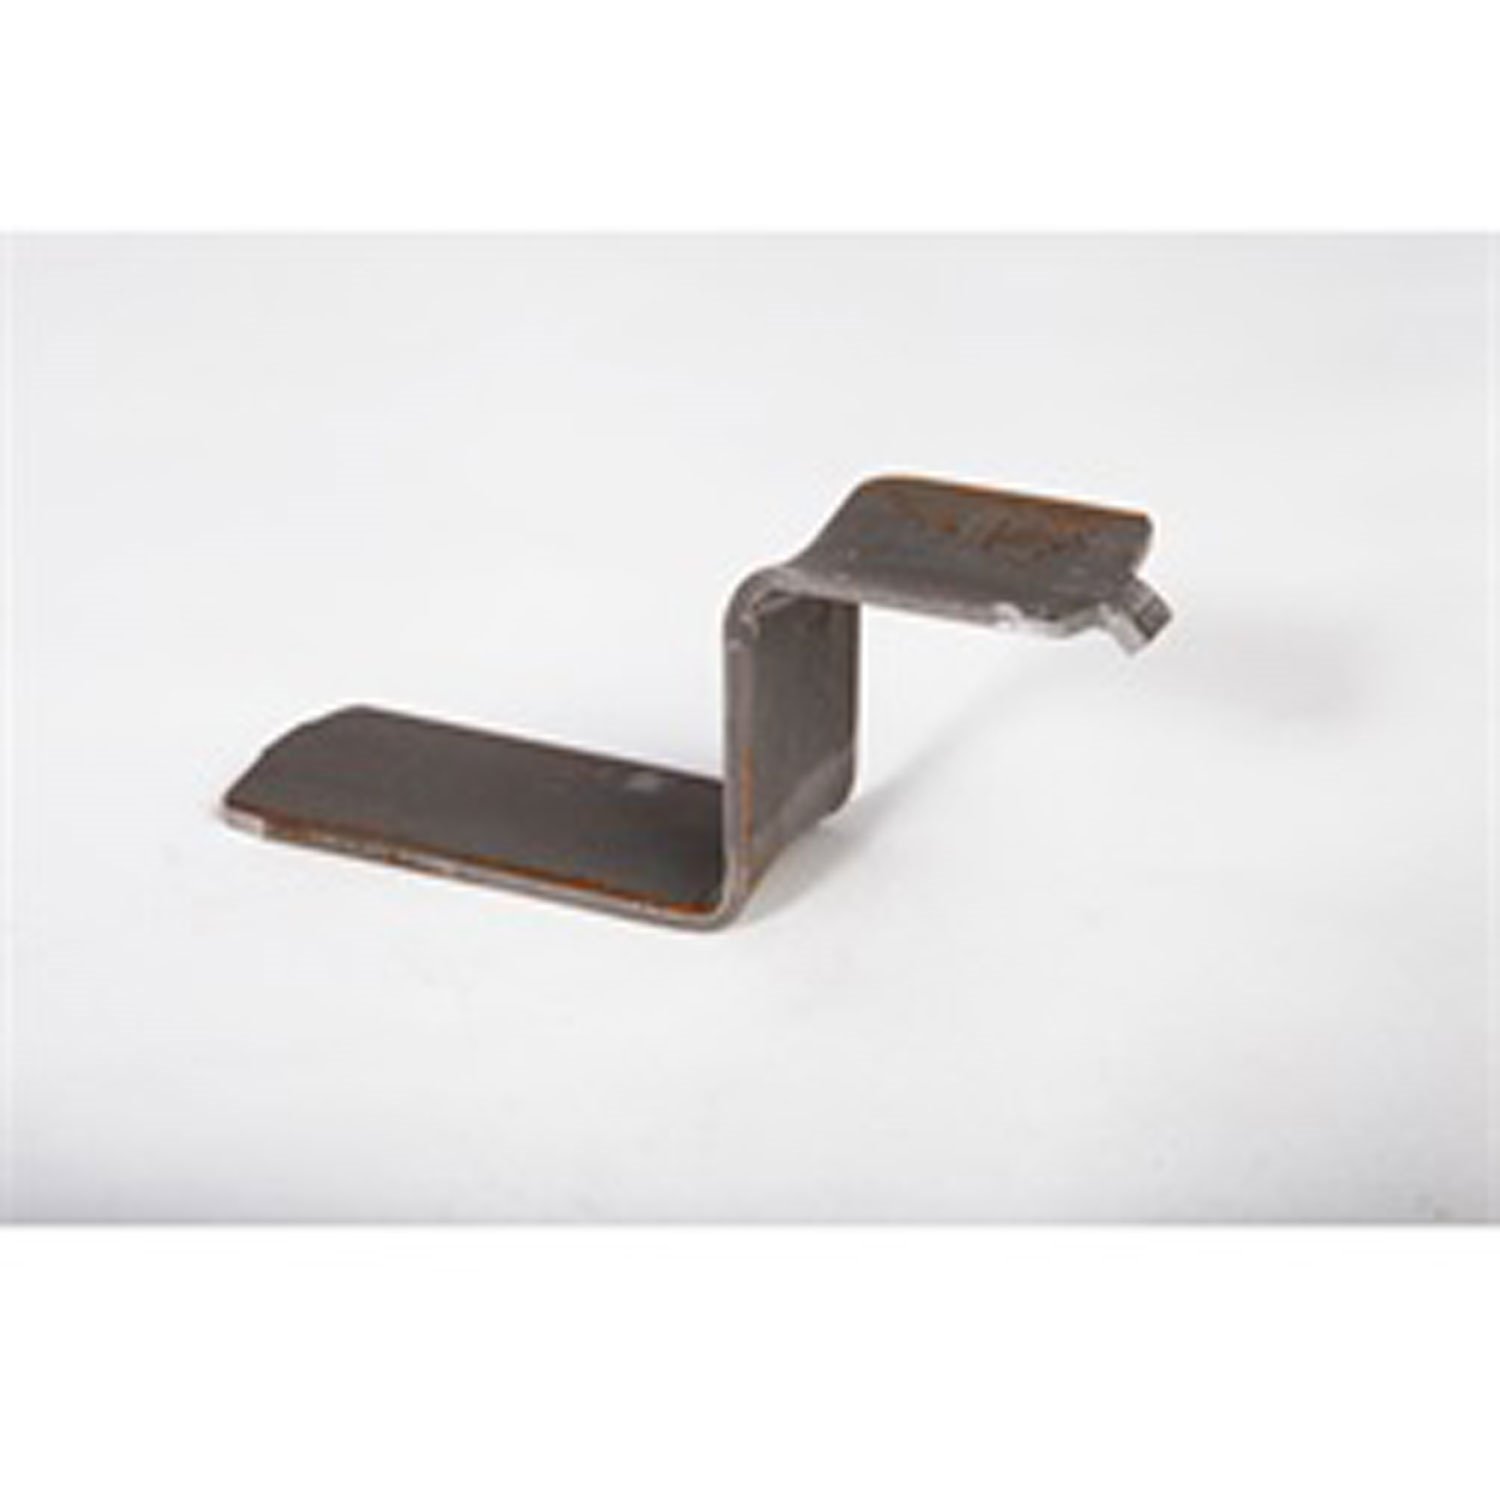 This exhaust bracket from Omix-ADA fits 79-86 Jeep CJ-5s and CJ-7s with a 151 cubic inch or 258 cubic inch engine.